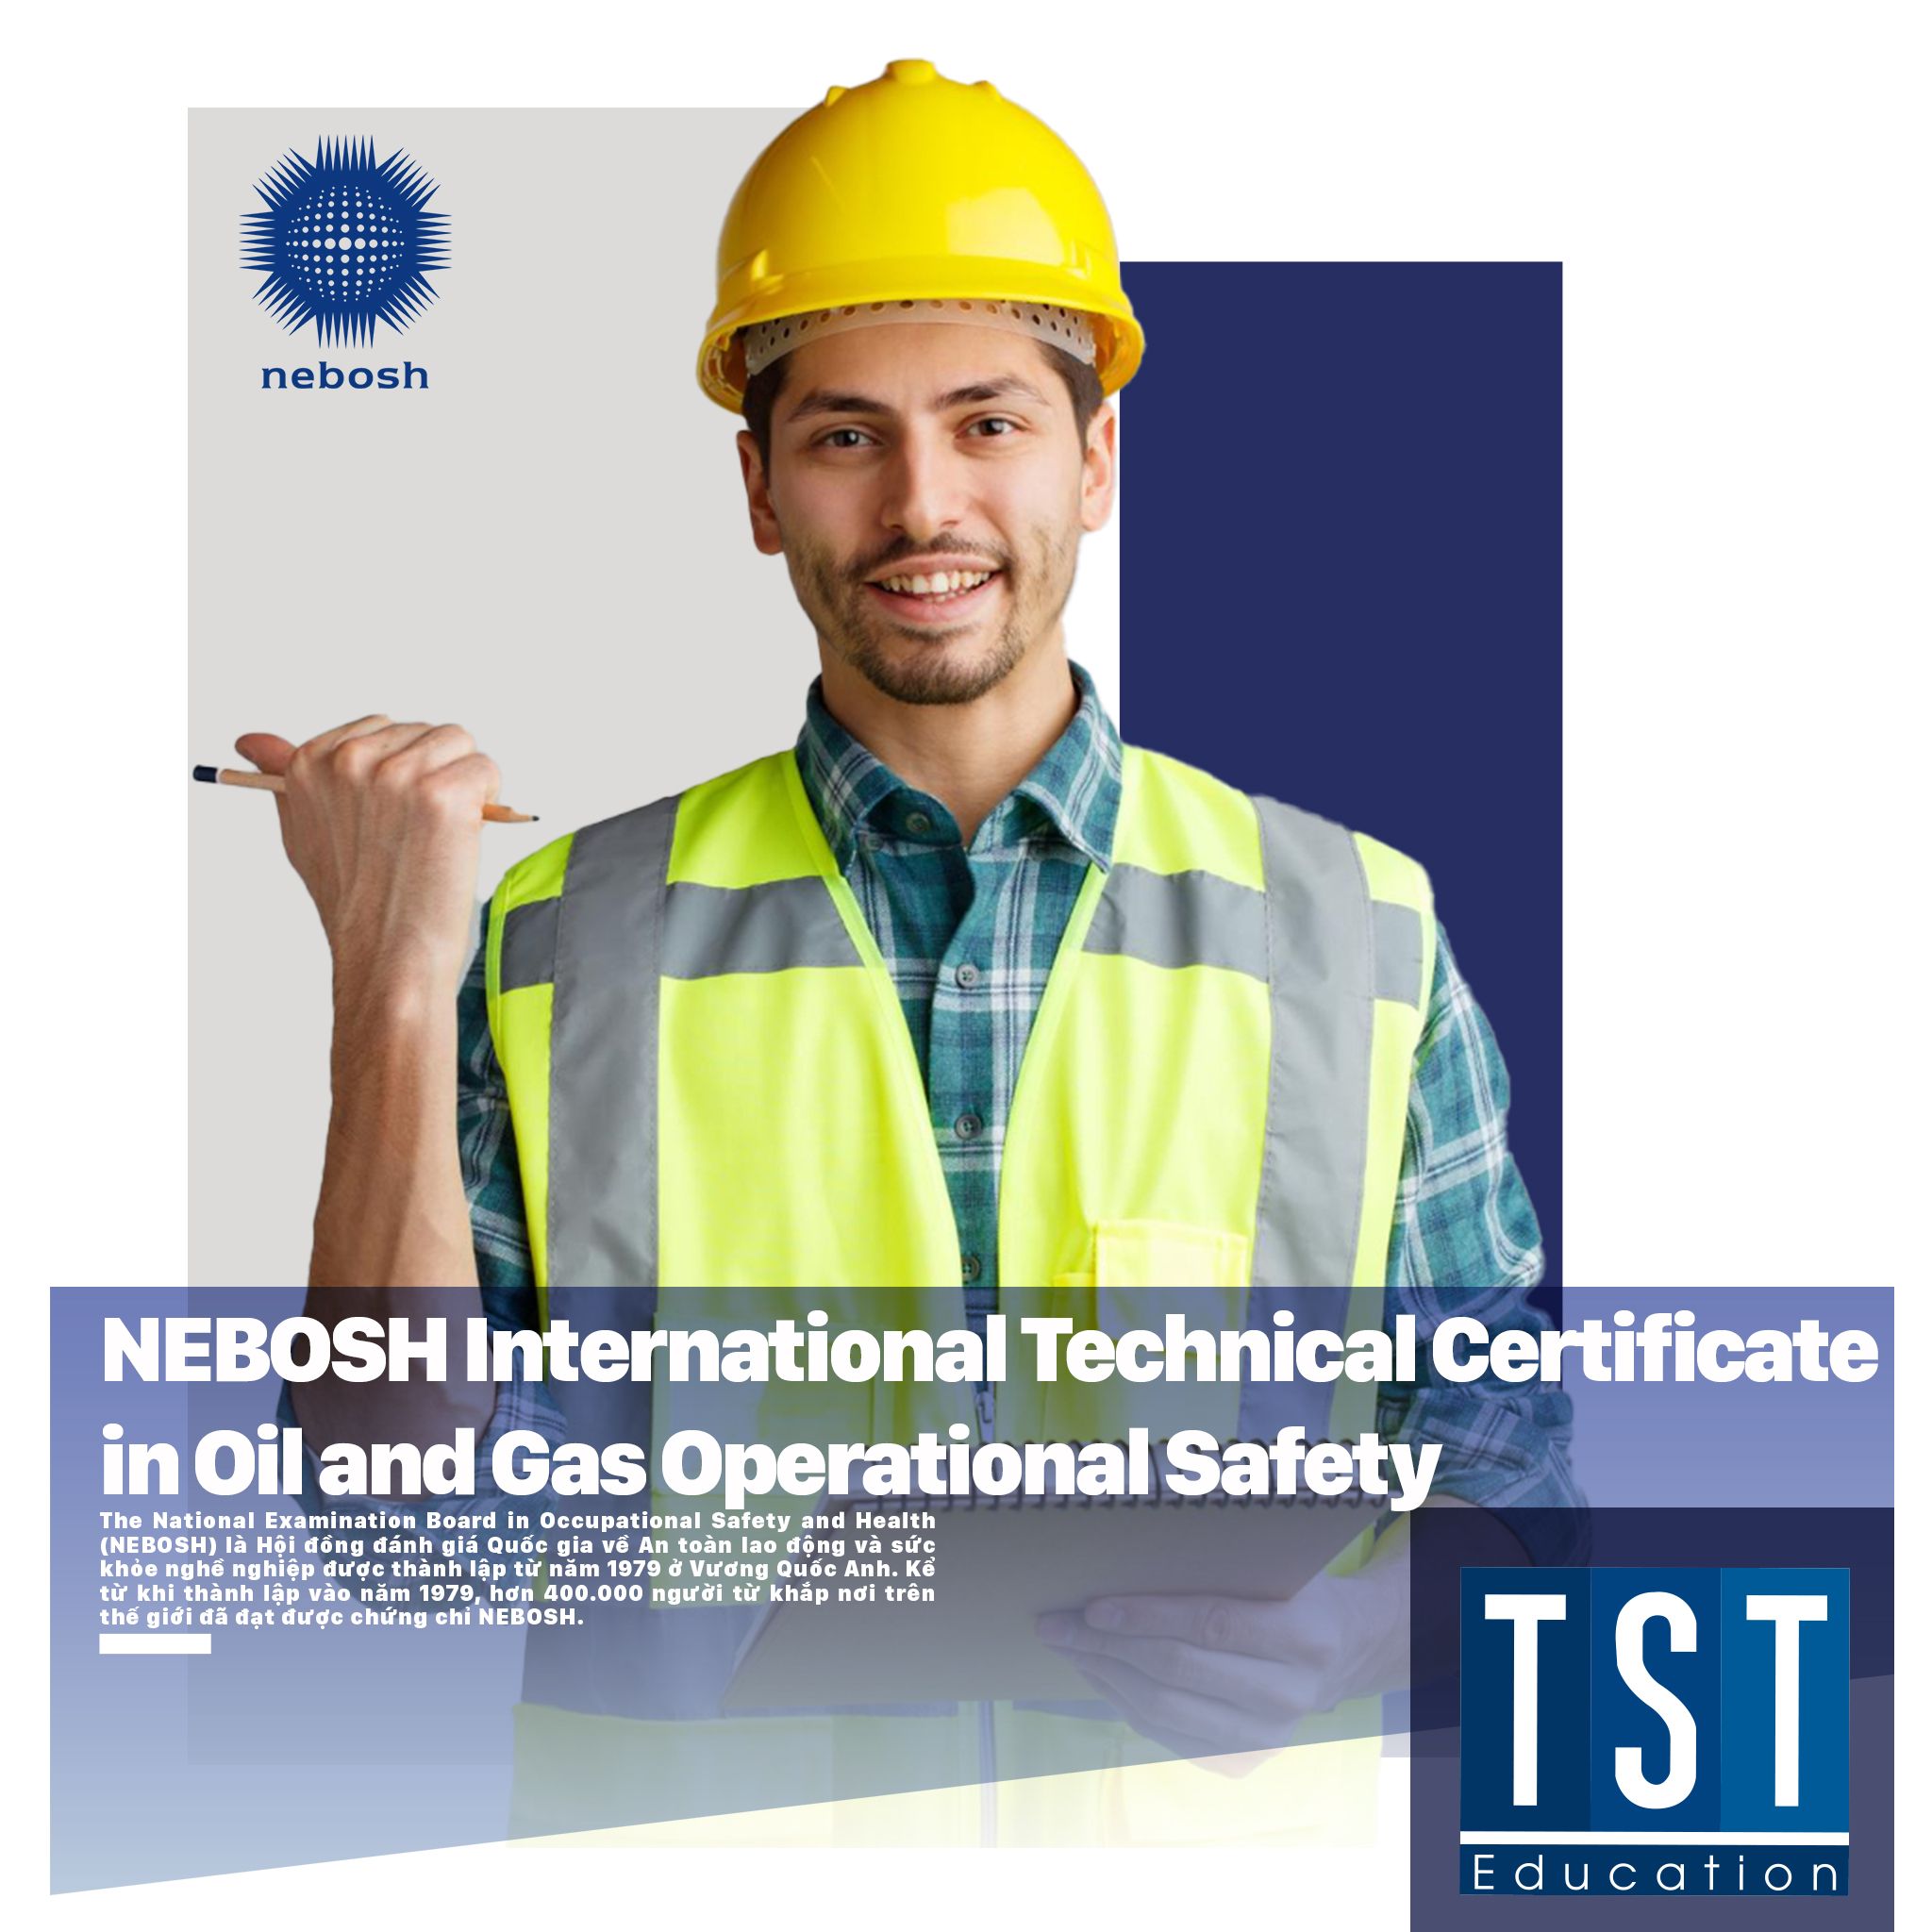  NEBOSH International Technical Certificate in Oil and Gas Operational Safety 